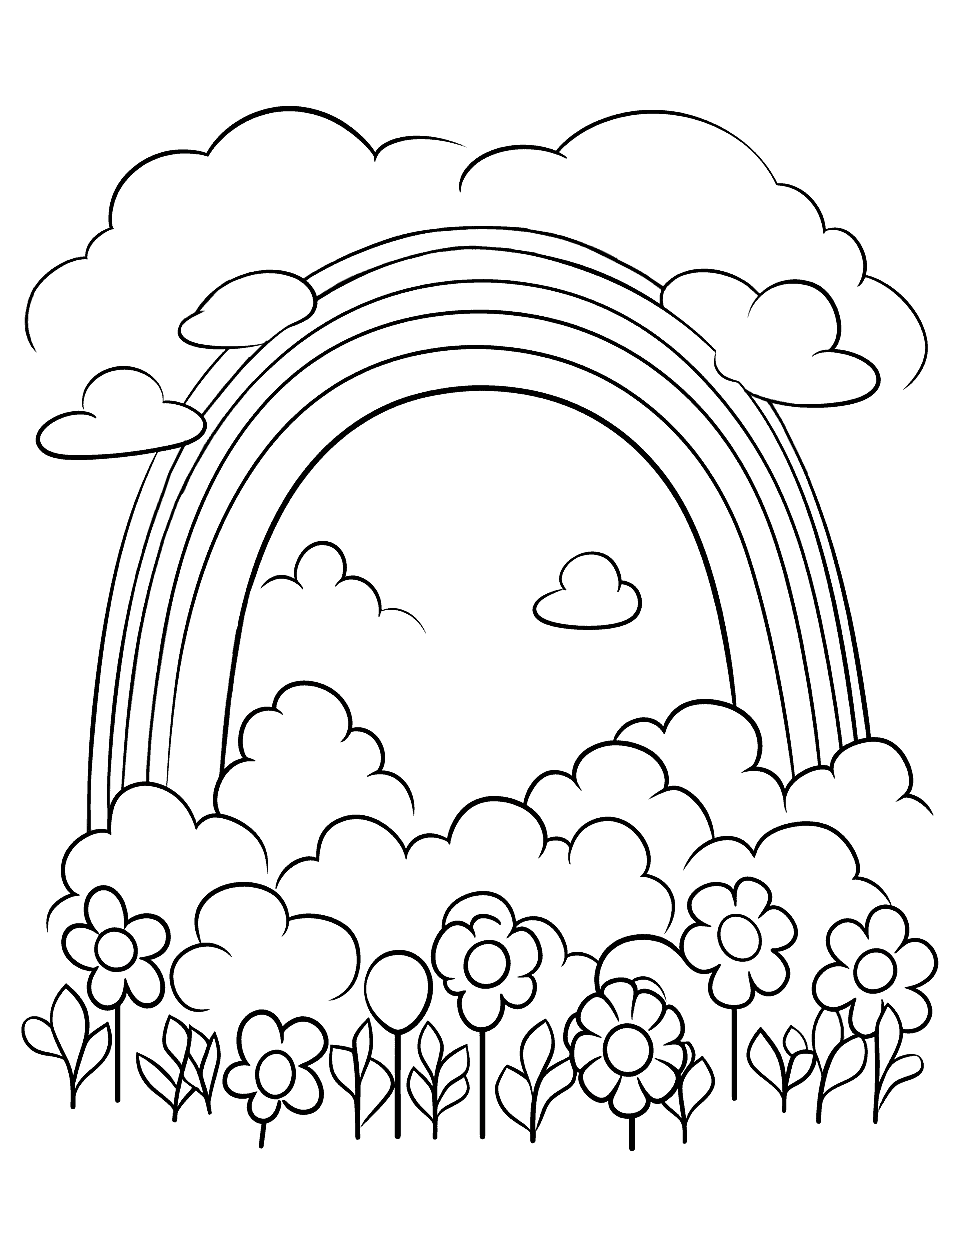 Flower Field Under Rainbow Coloring Page - A beautiful field of blooming flowers with a rainbow arcing over it.